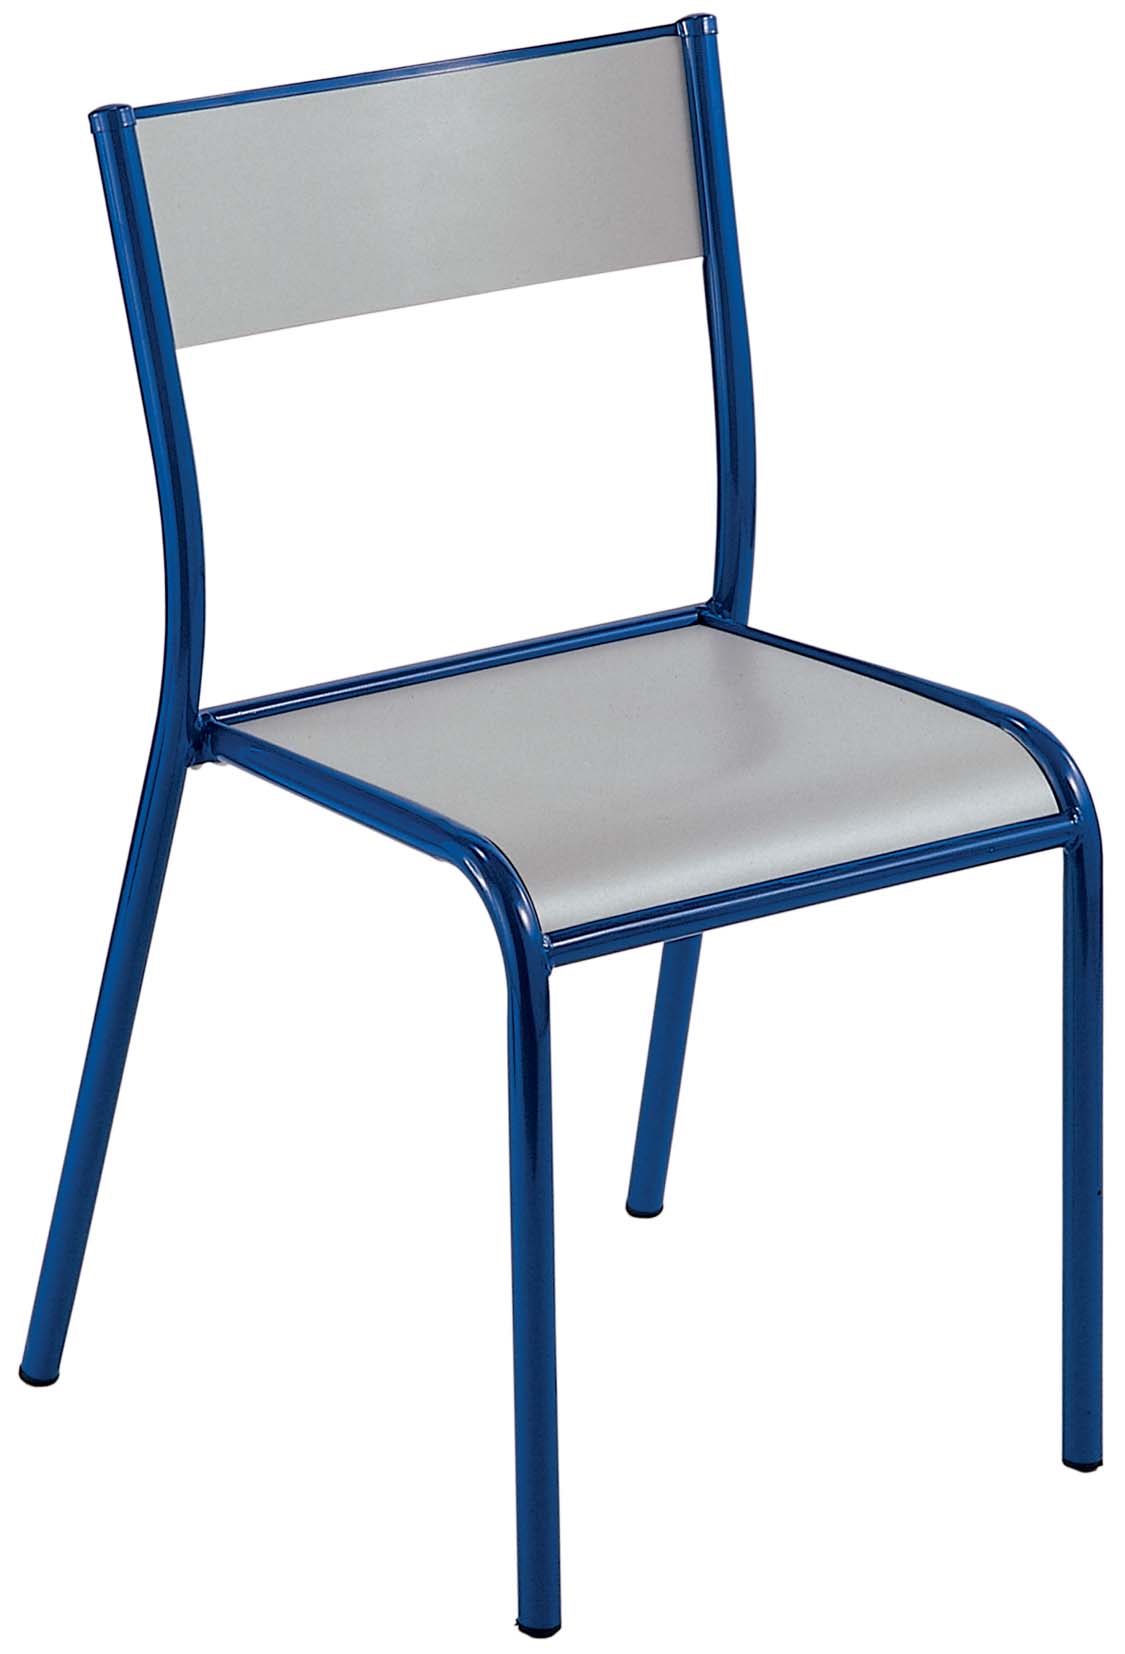 Chaise scolaire - photo 1